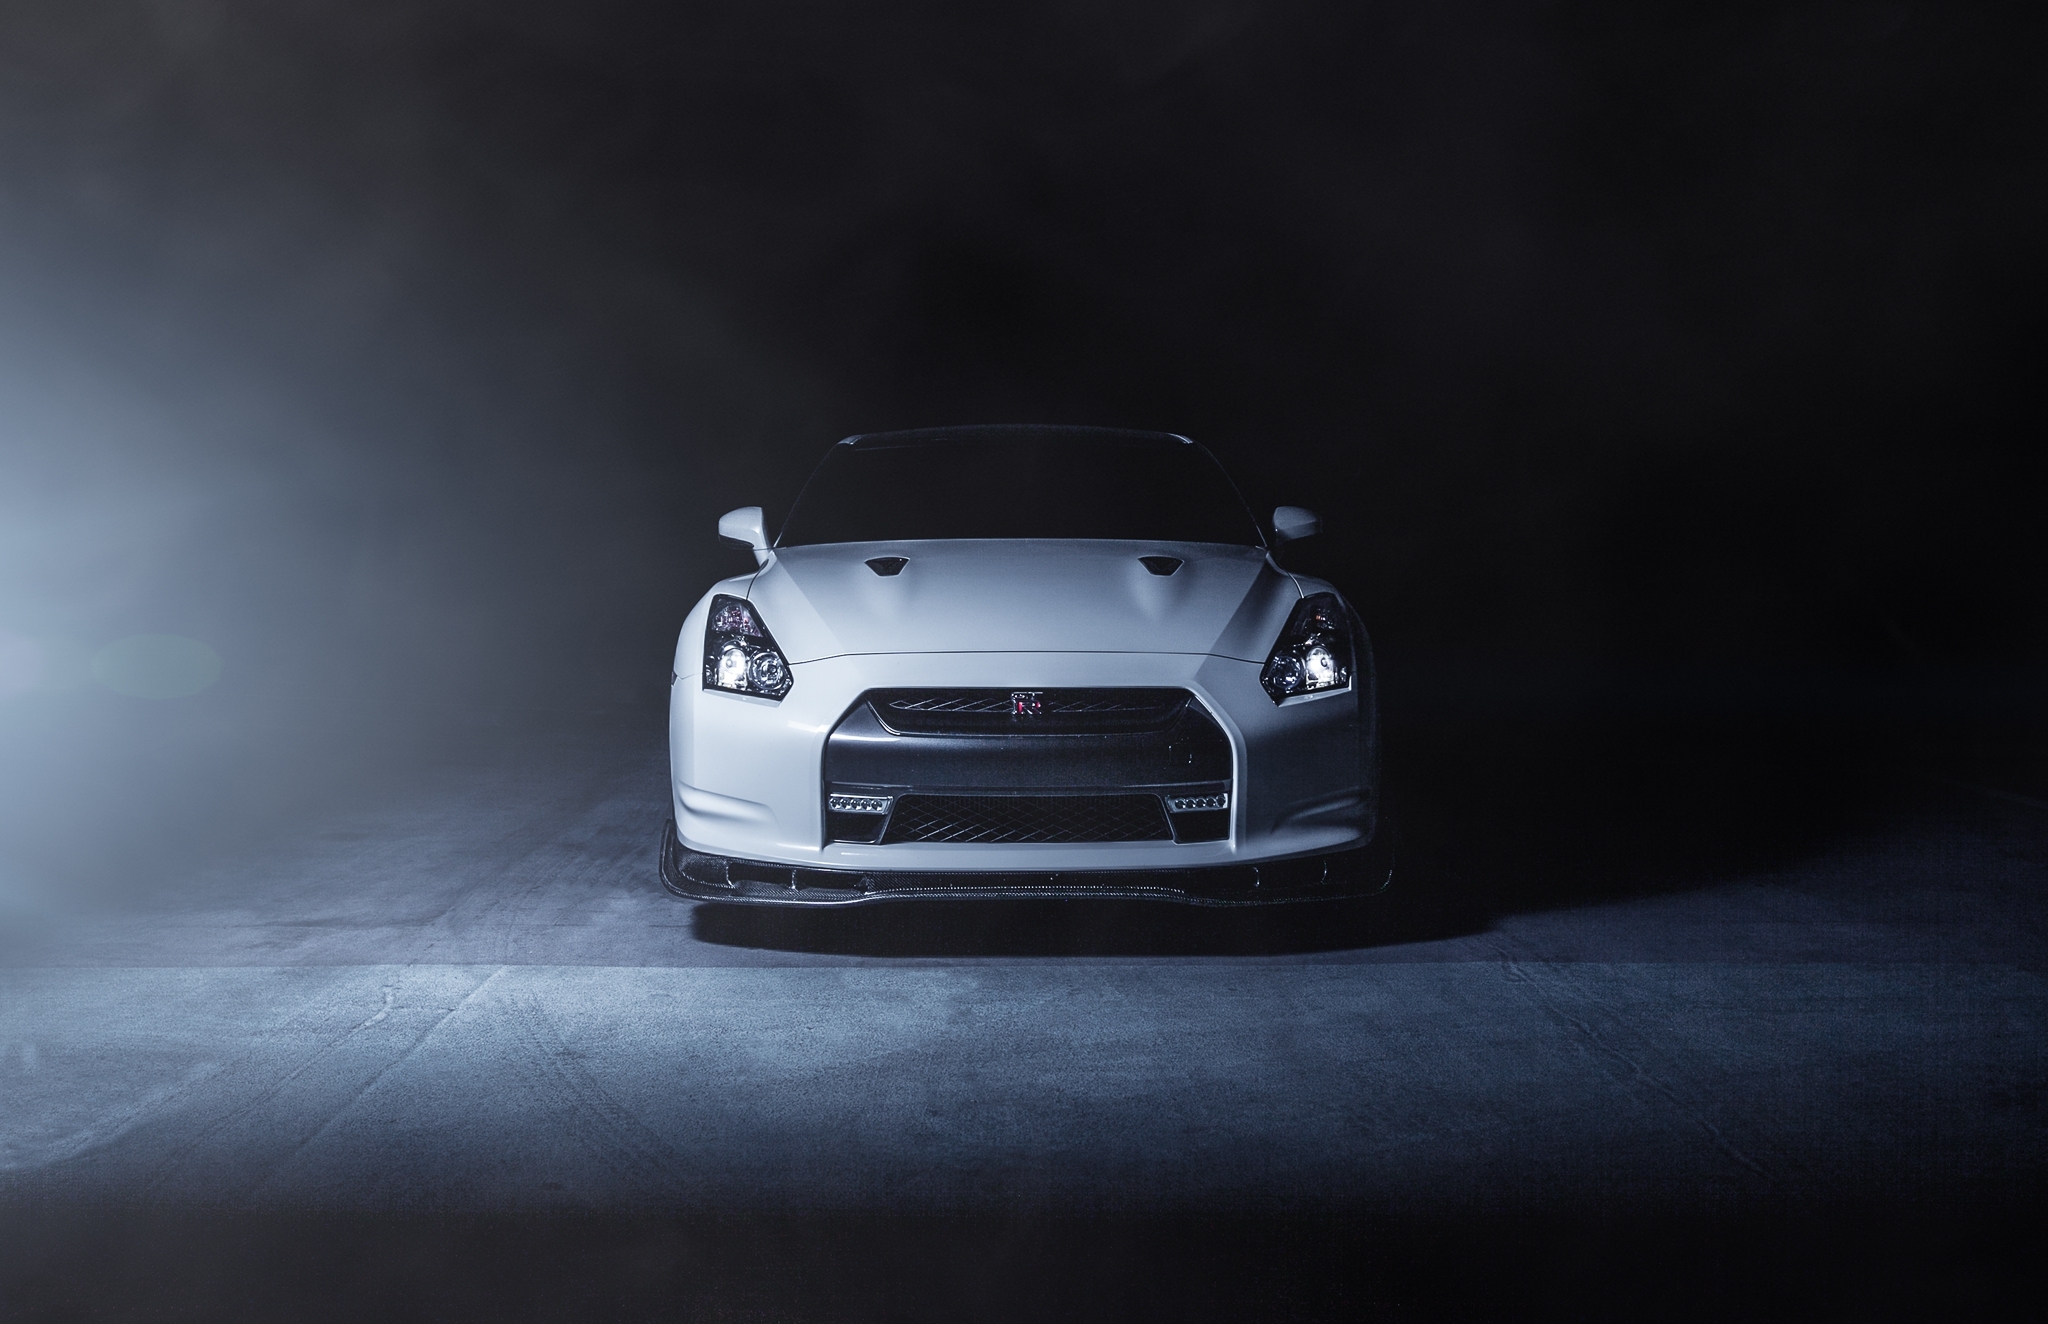 nissan, cars, white, smoke, gt r, front end, limber, r35 cellphone